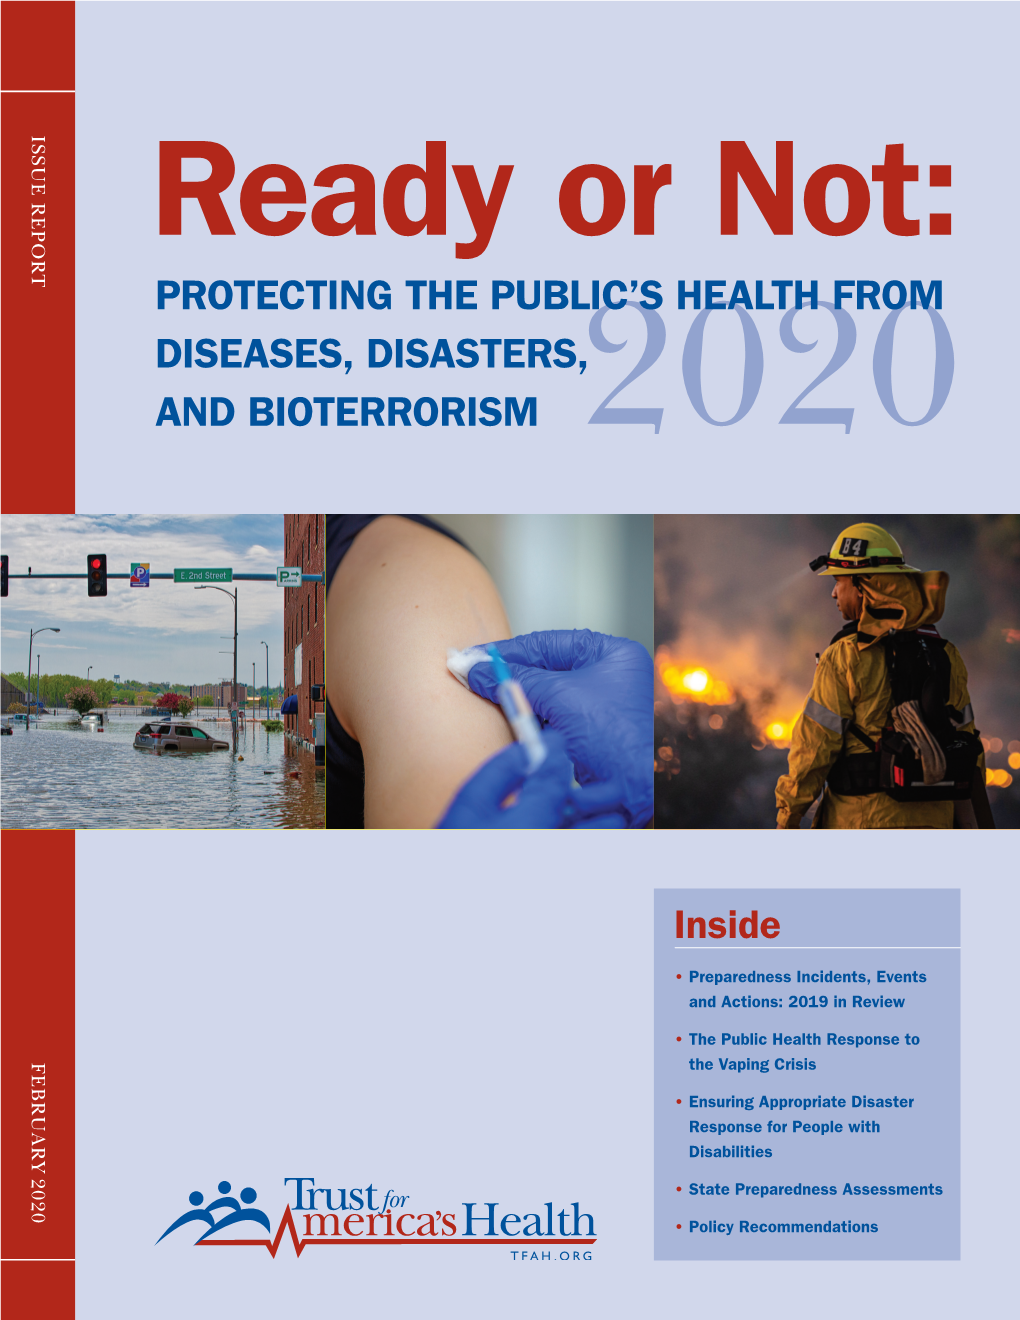 Protecting the Public's Health from Diseases, Disasters and Bioterrorism